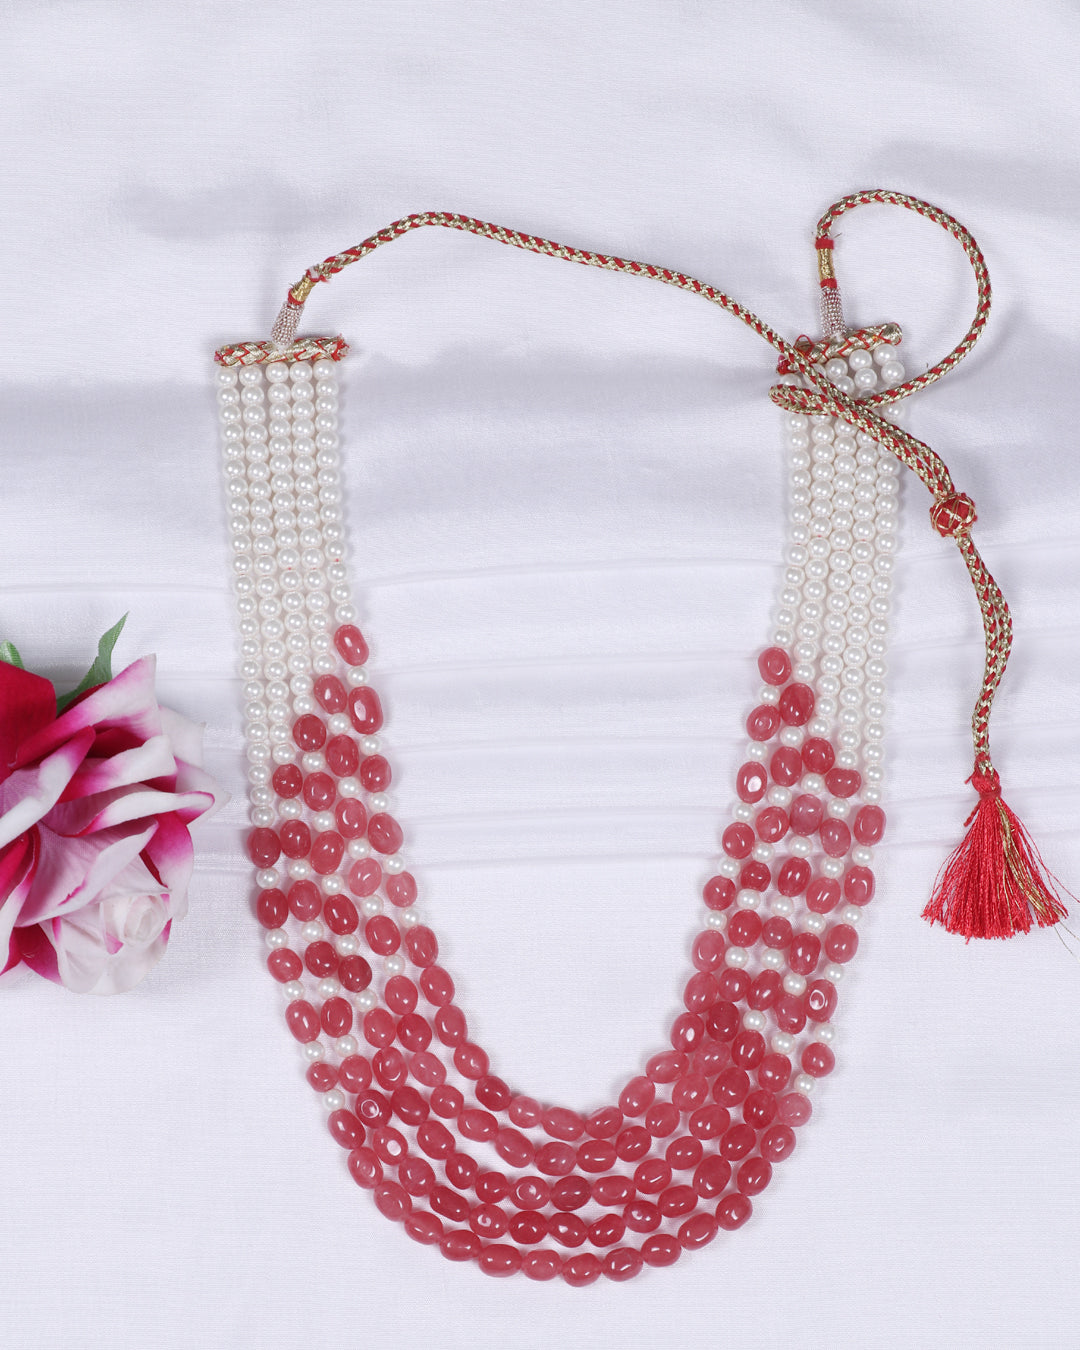 Natural Pink Quartz & Pearl Gemstone Beads Necklace Jewelry